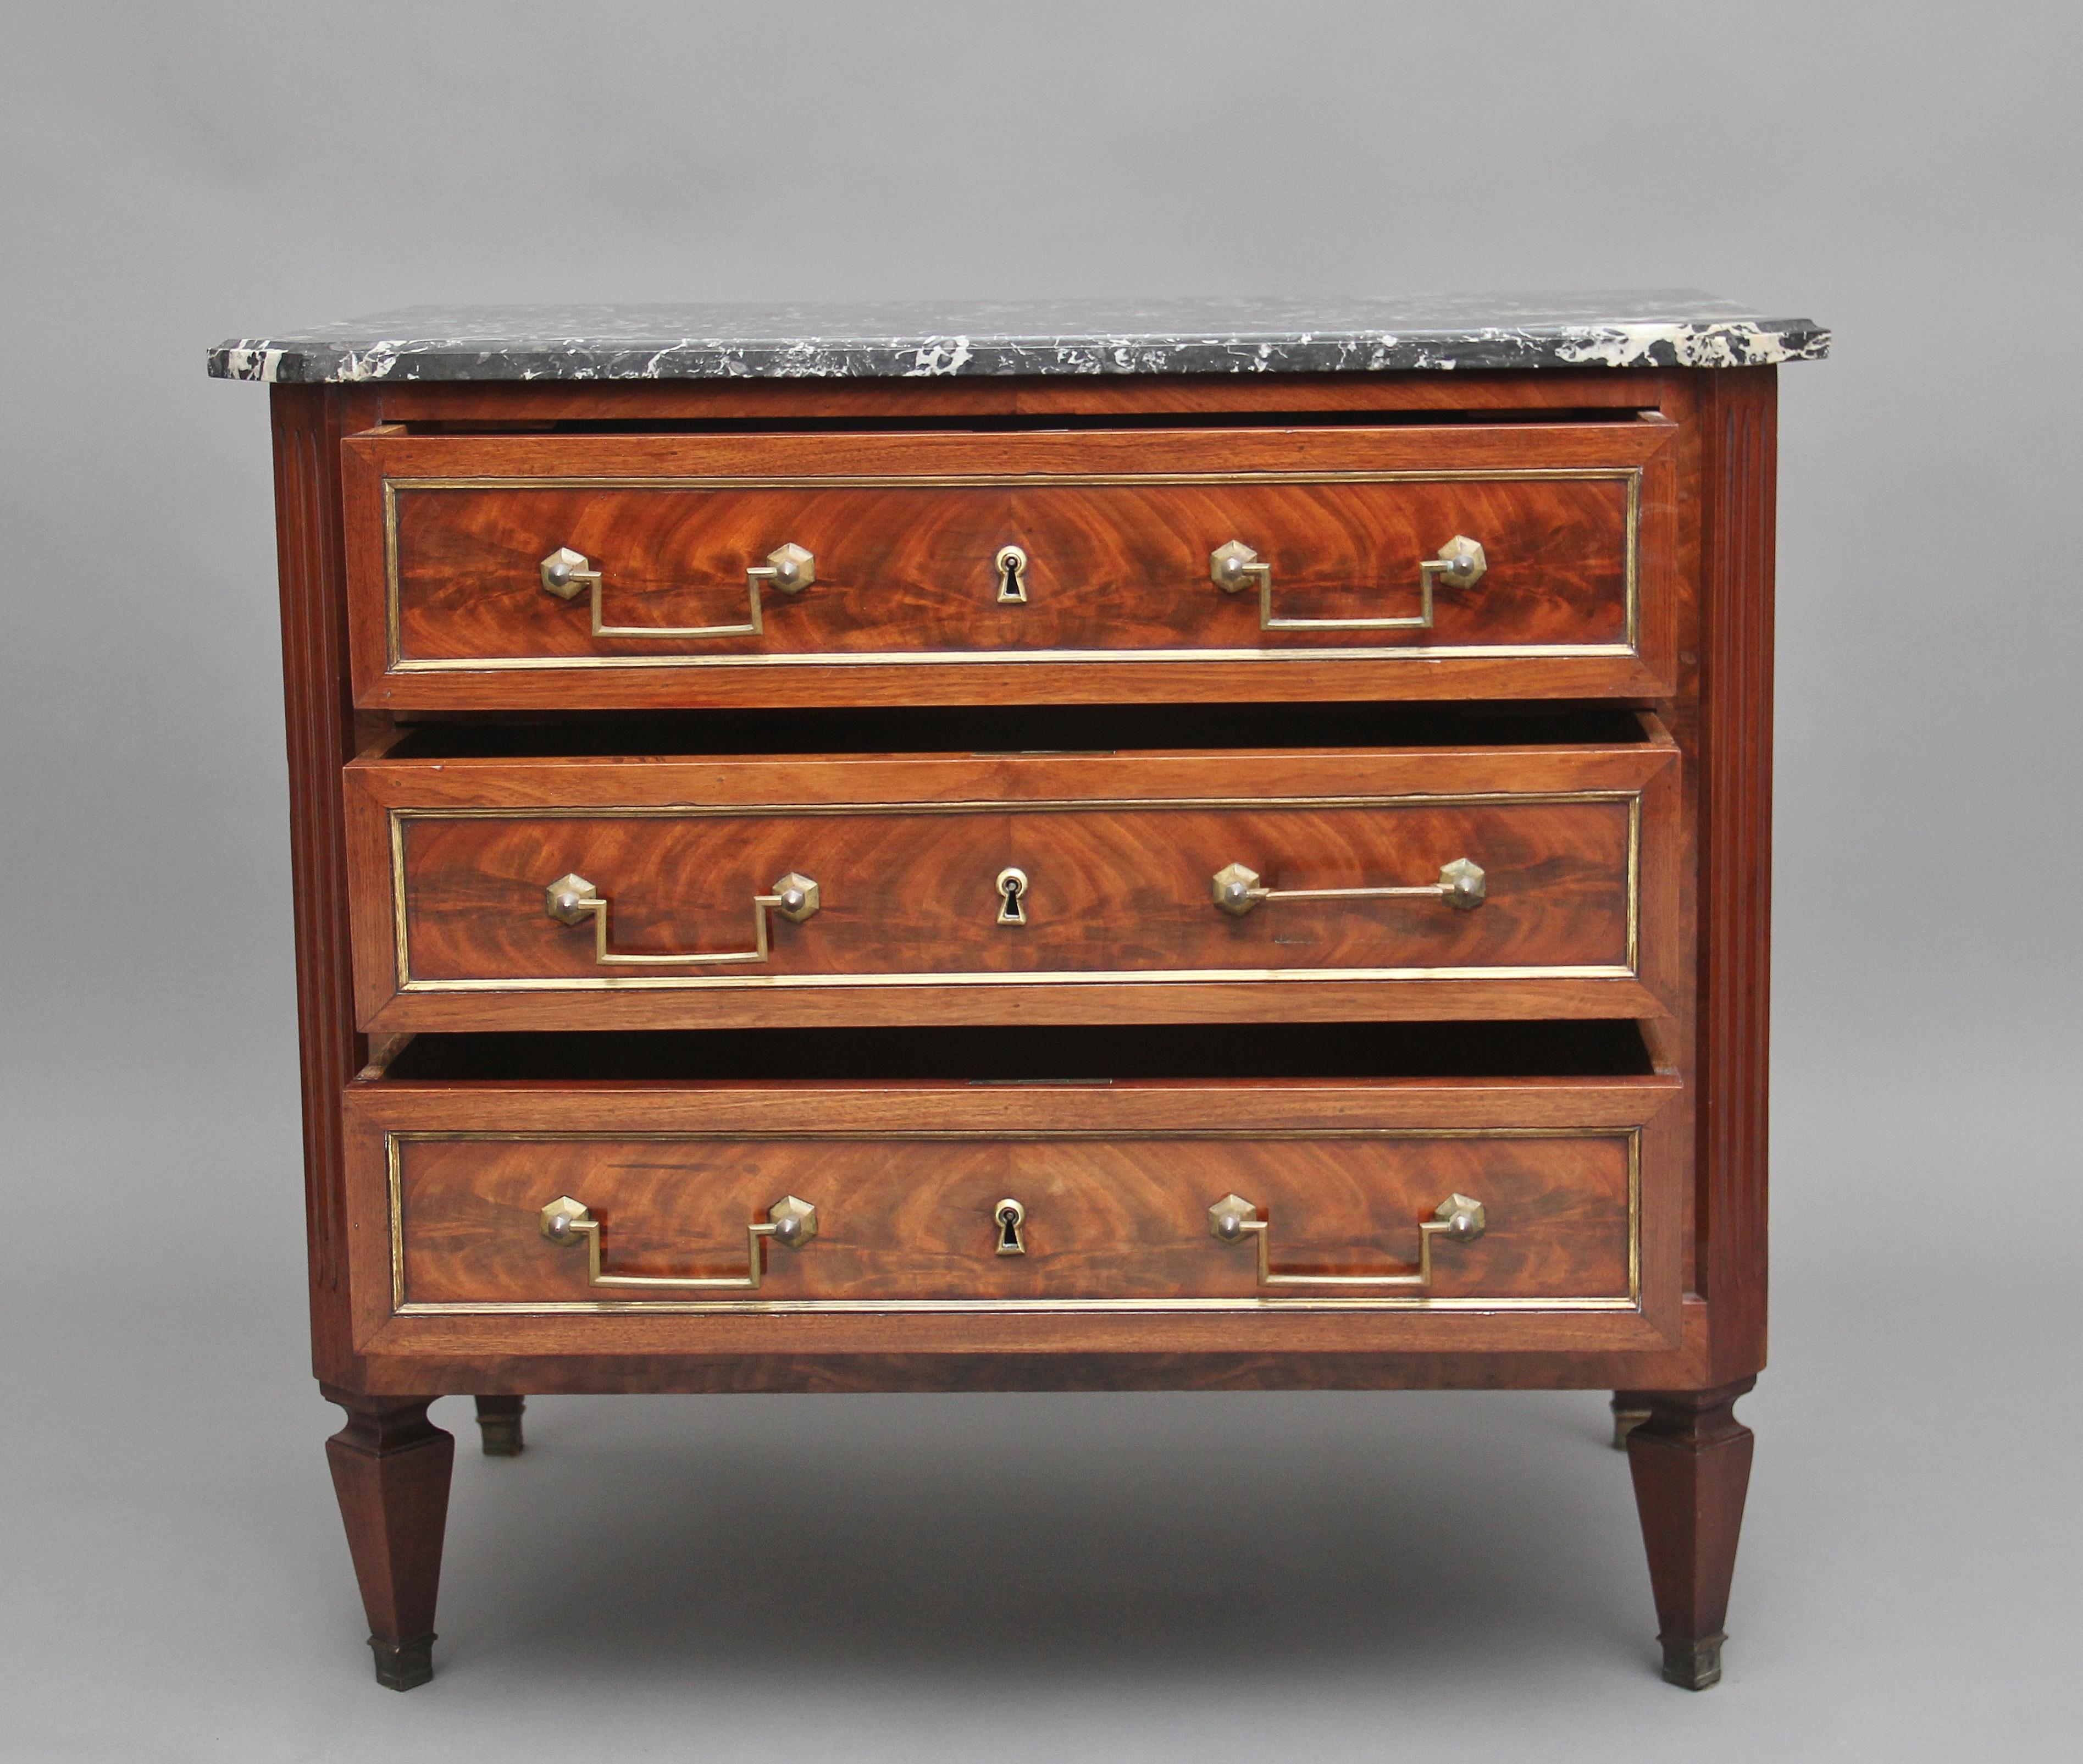 19th century French flame mahogany and marble top chest of good proportions, having a grey and white moulded edge marble top above three oak lined drawers with original brass handles and escutcheons, the drawer fronts decorated with brass mouldings,